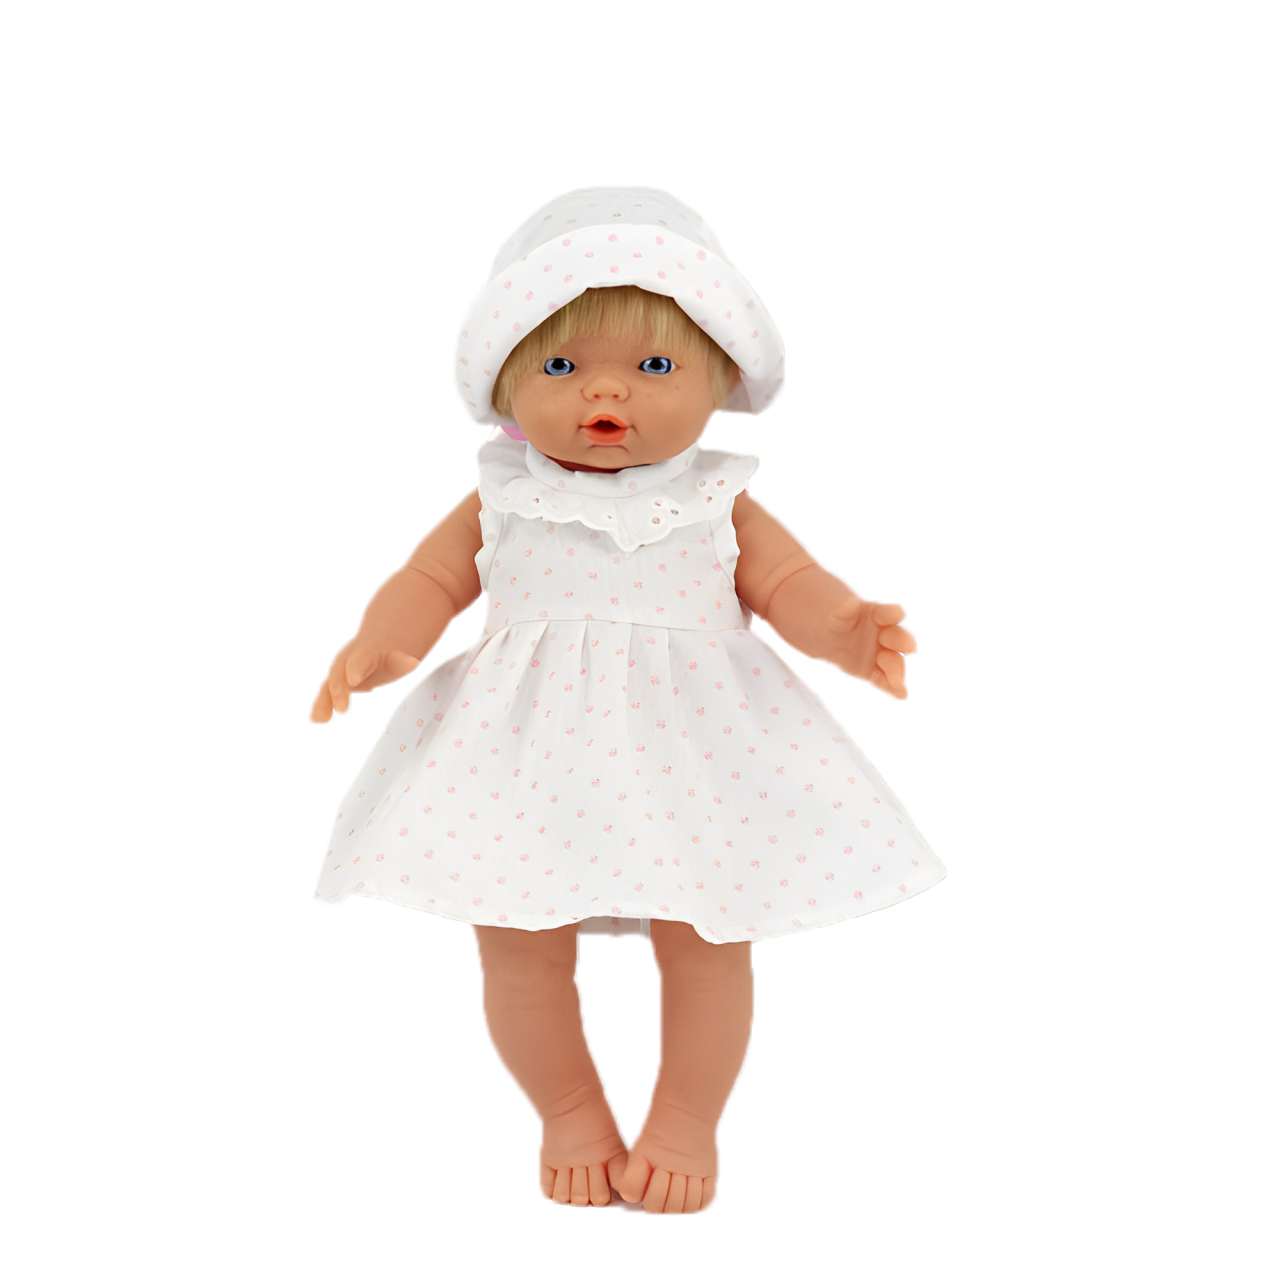 "Baby Topitos" doll dress 